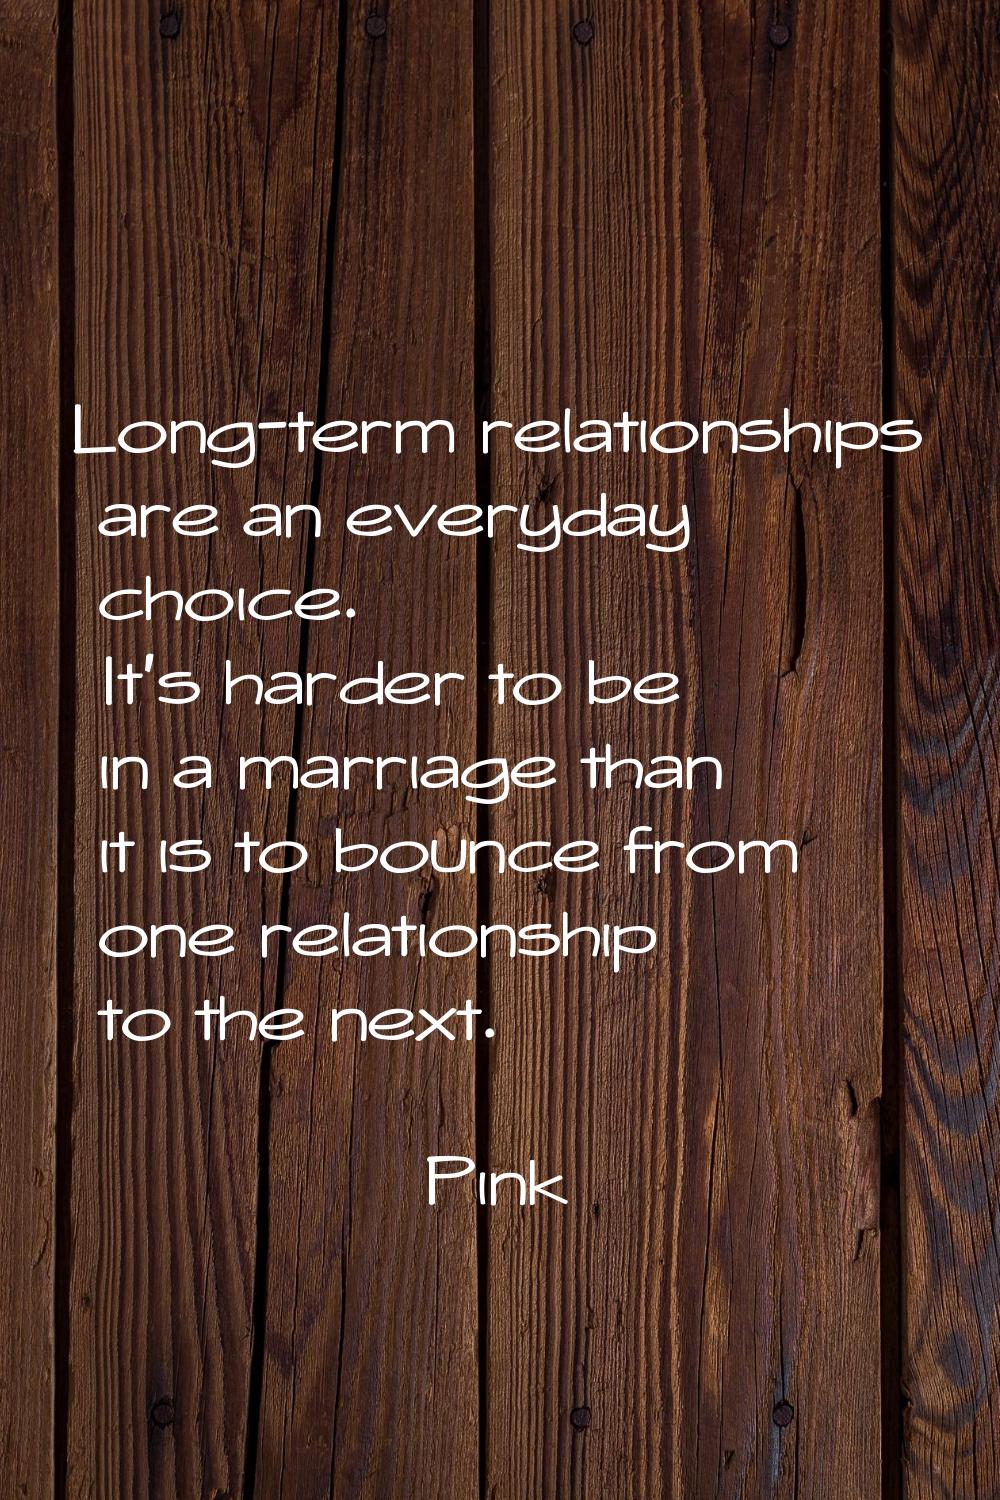 Long-term relationships are an everyday choice. It's harder to be in a marriage than it is to bounc